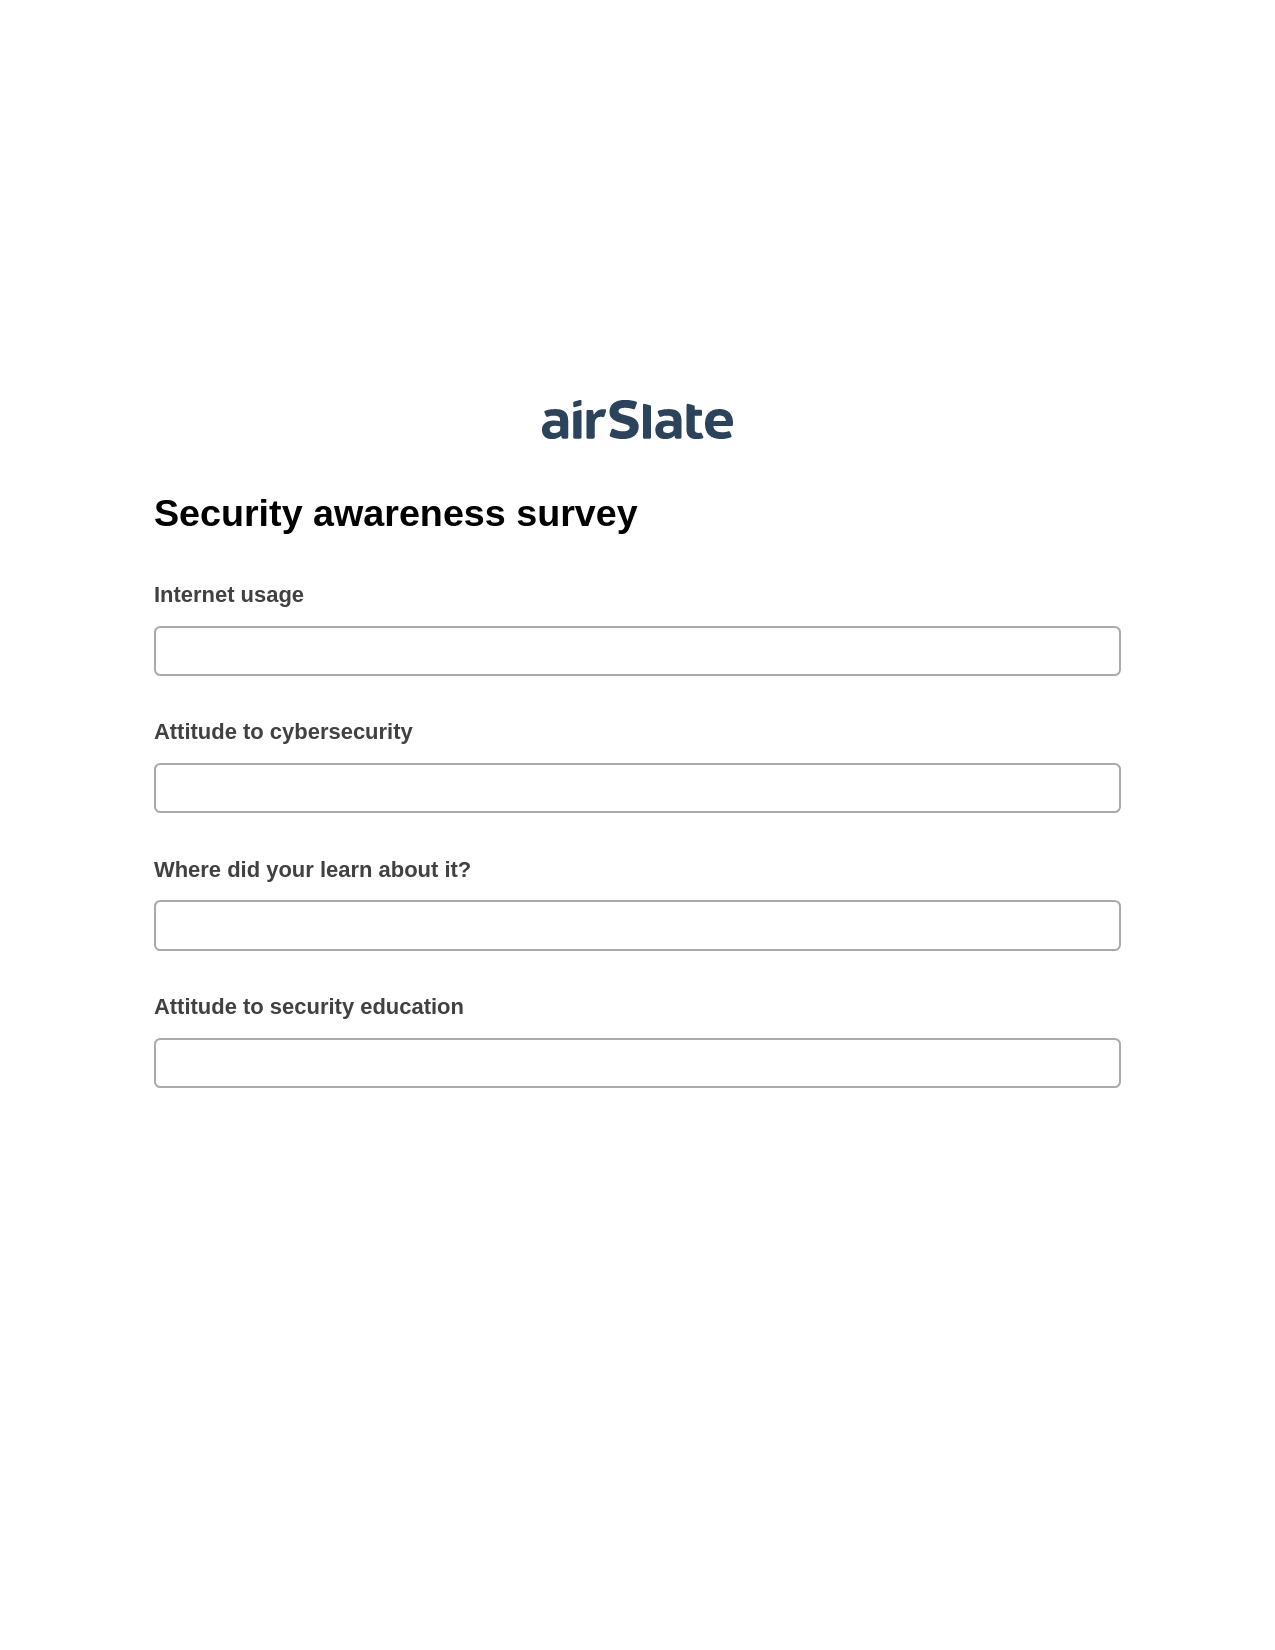 Security awareness survey Pre-fill from MySQL Dropdown Options Bot, Remove Tags From Slate Bot, Post-finish Document Bot